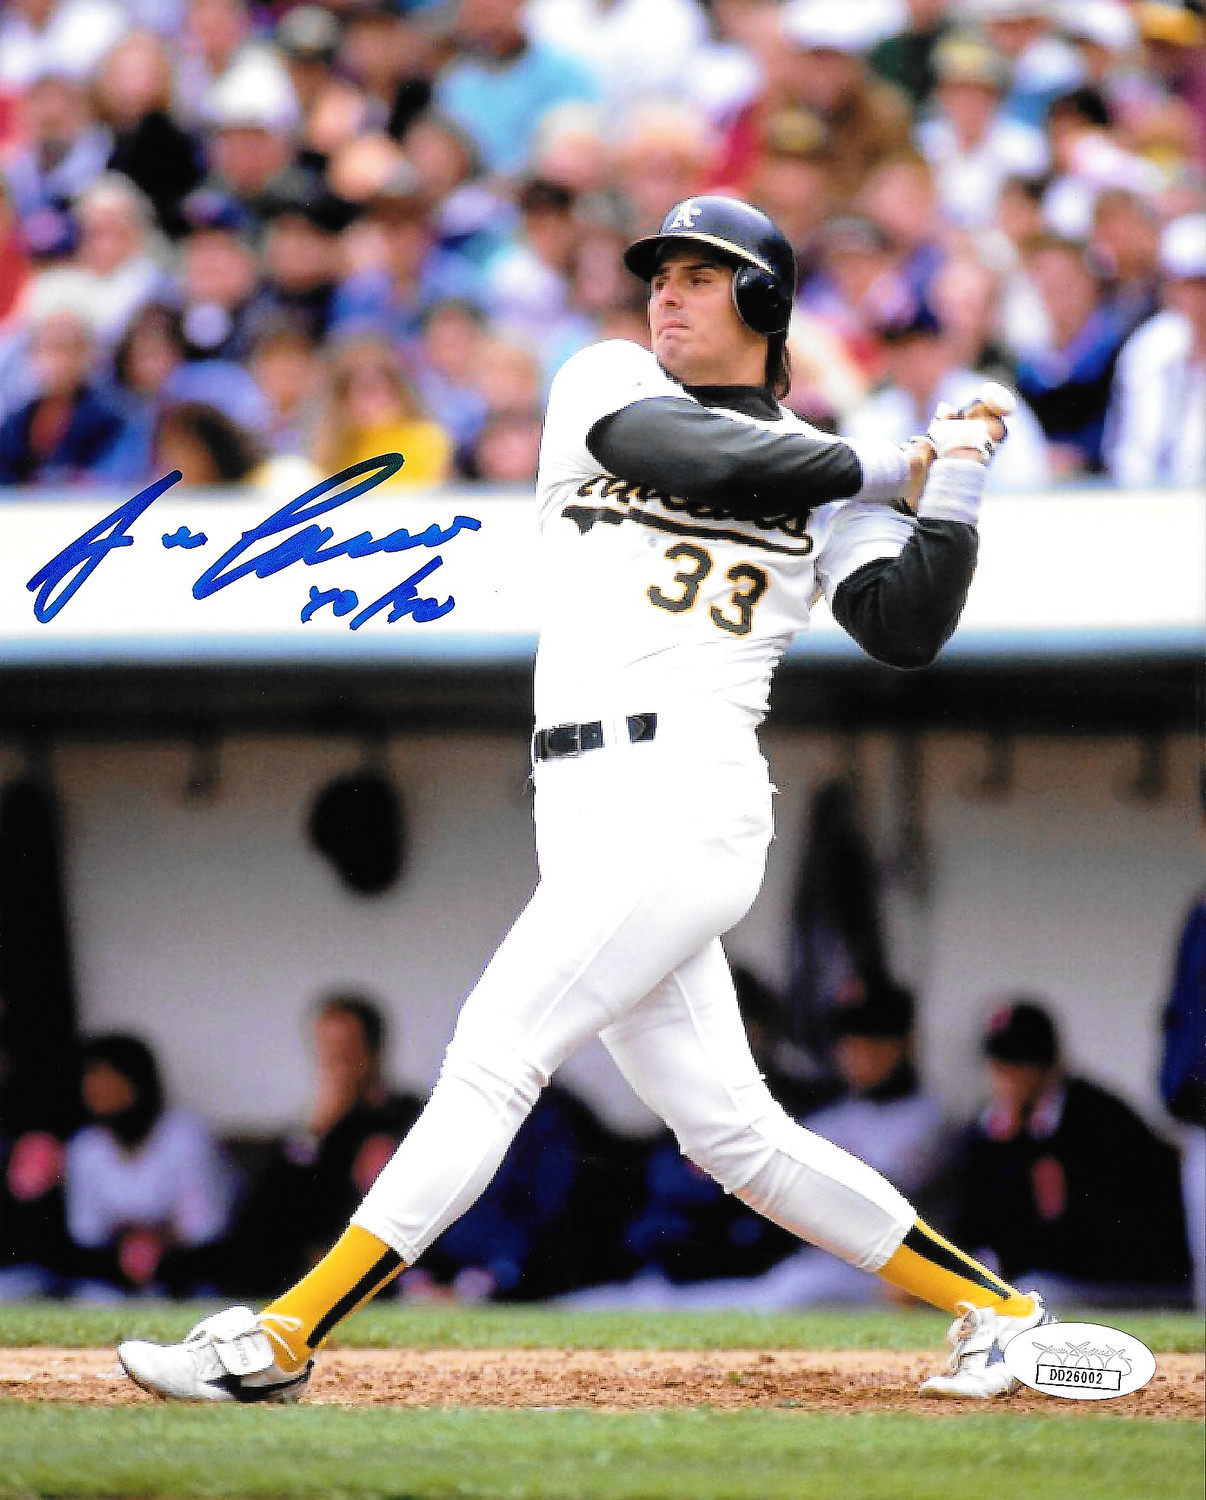 Jose Canseco, autographed 8x10, New York Yankees